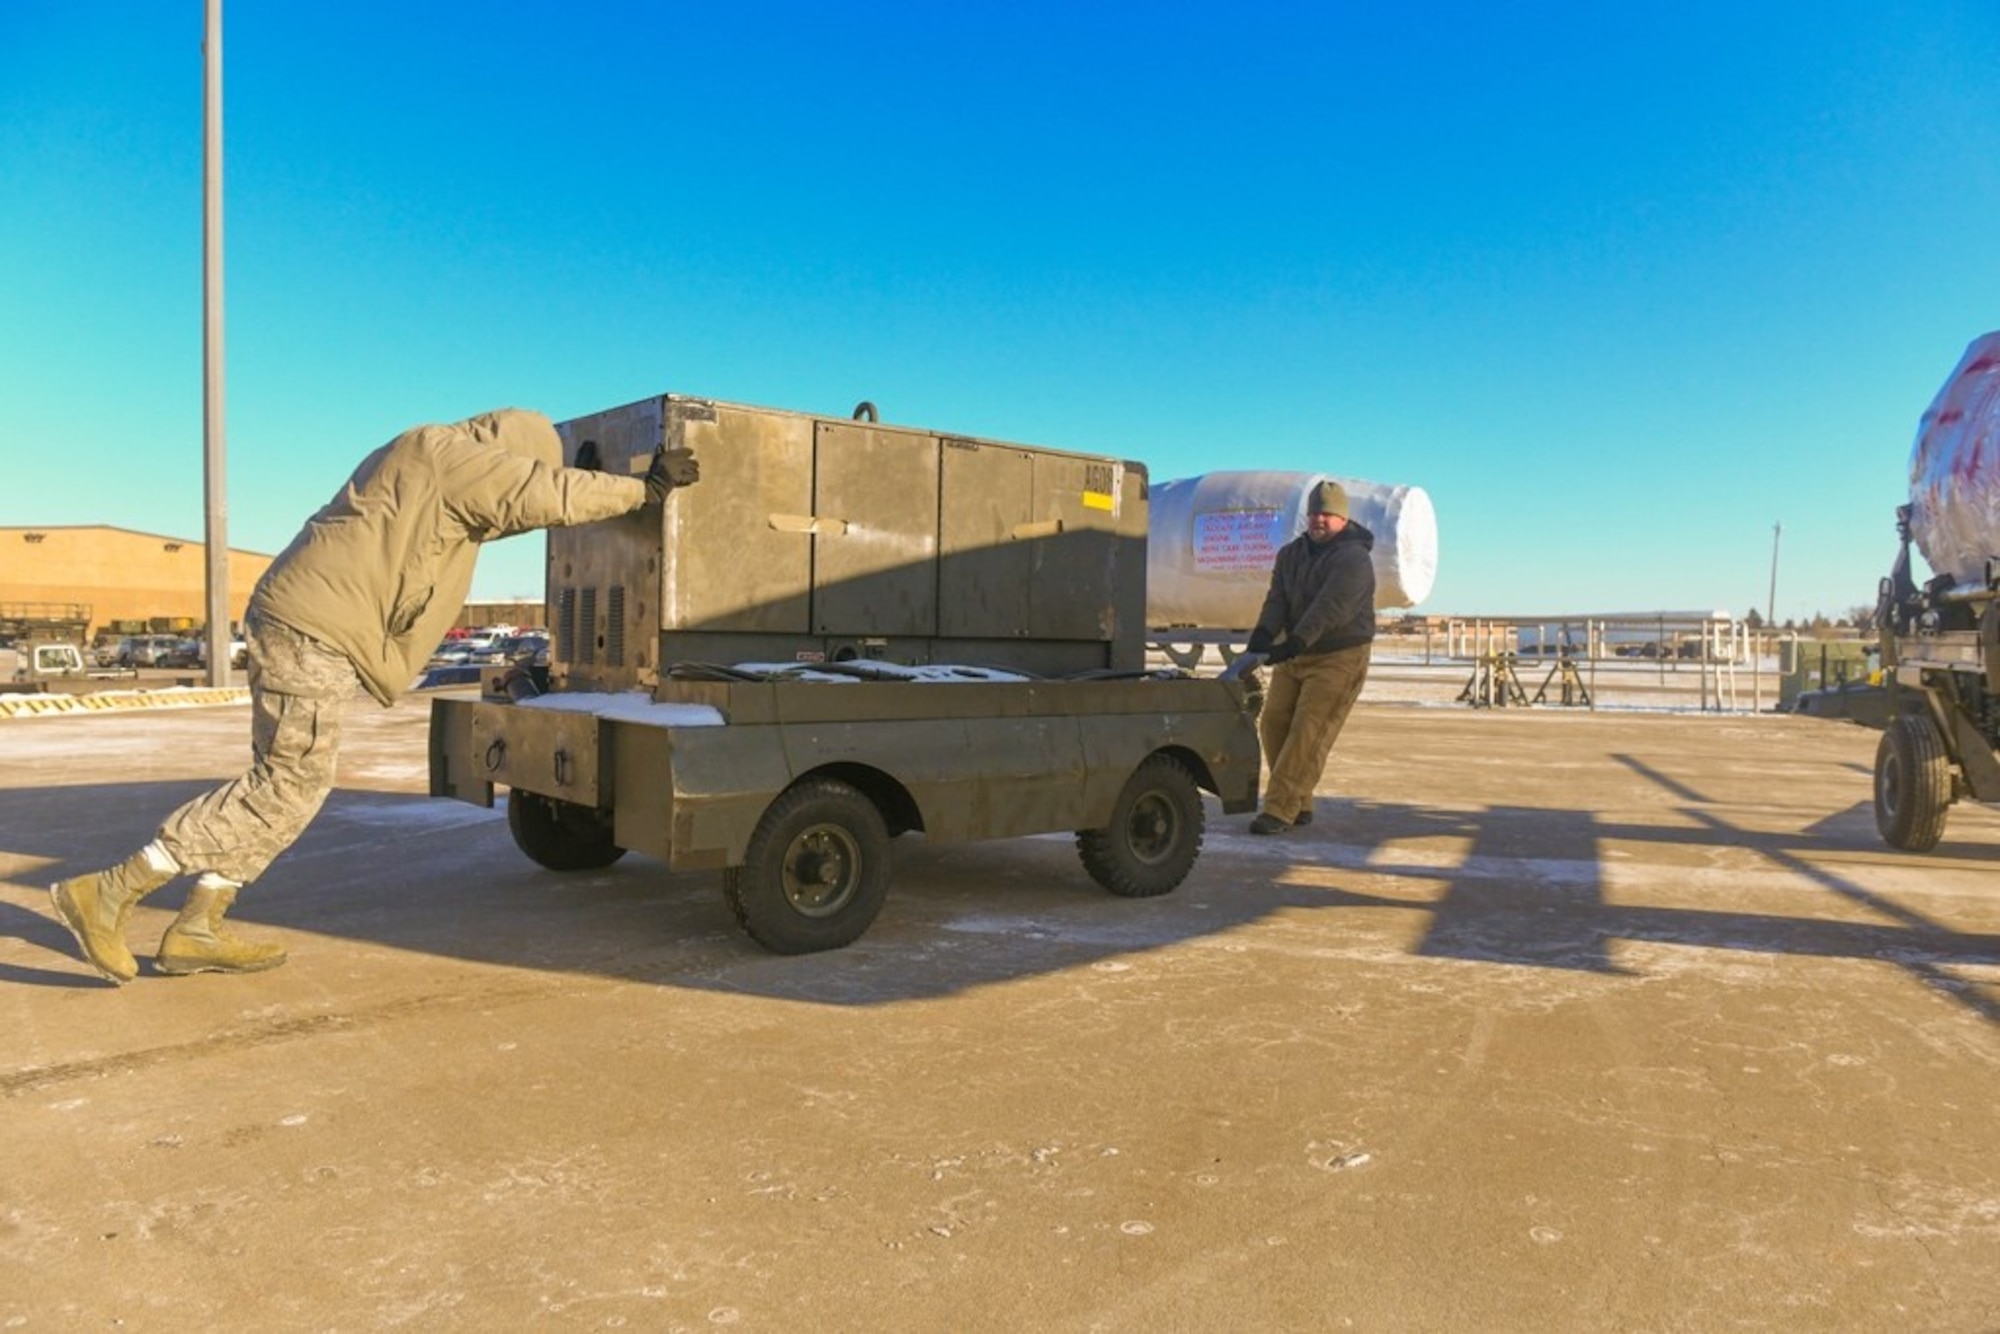 Members of the 28th Logistics Readiness Squadron prepare to load a crate onto a semi-truck carrying supplies Jan. 16, 2020, at Ellsworth Air Force Base, S.D. Red Flag is an annual training exercise for both U.S. and coalition forces that provides realistic training through a simulated combat environment, preparing them for future exercises, missions and deployments. (U.S. Air Force photo by Senior Airman Michael Jones)